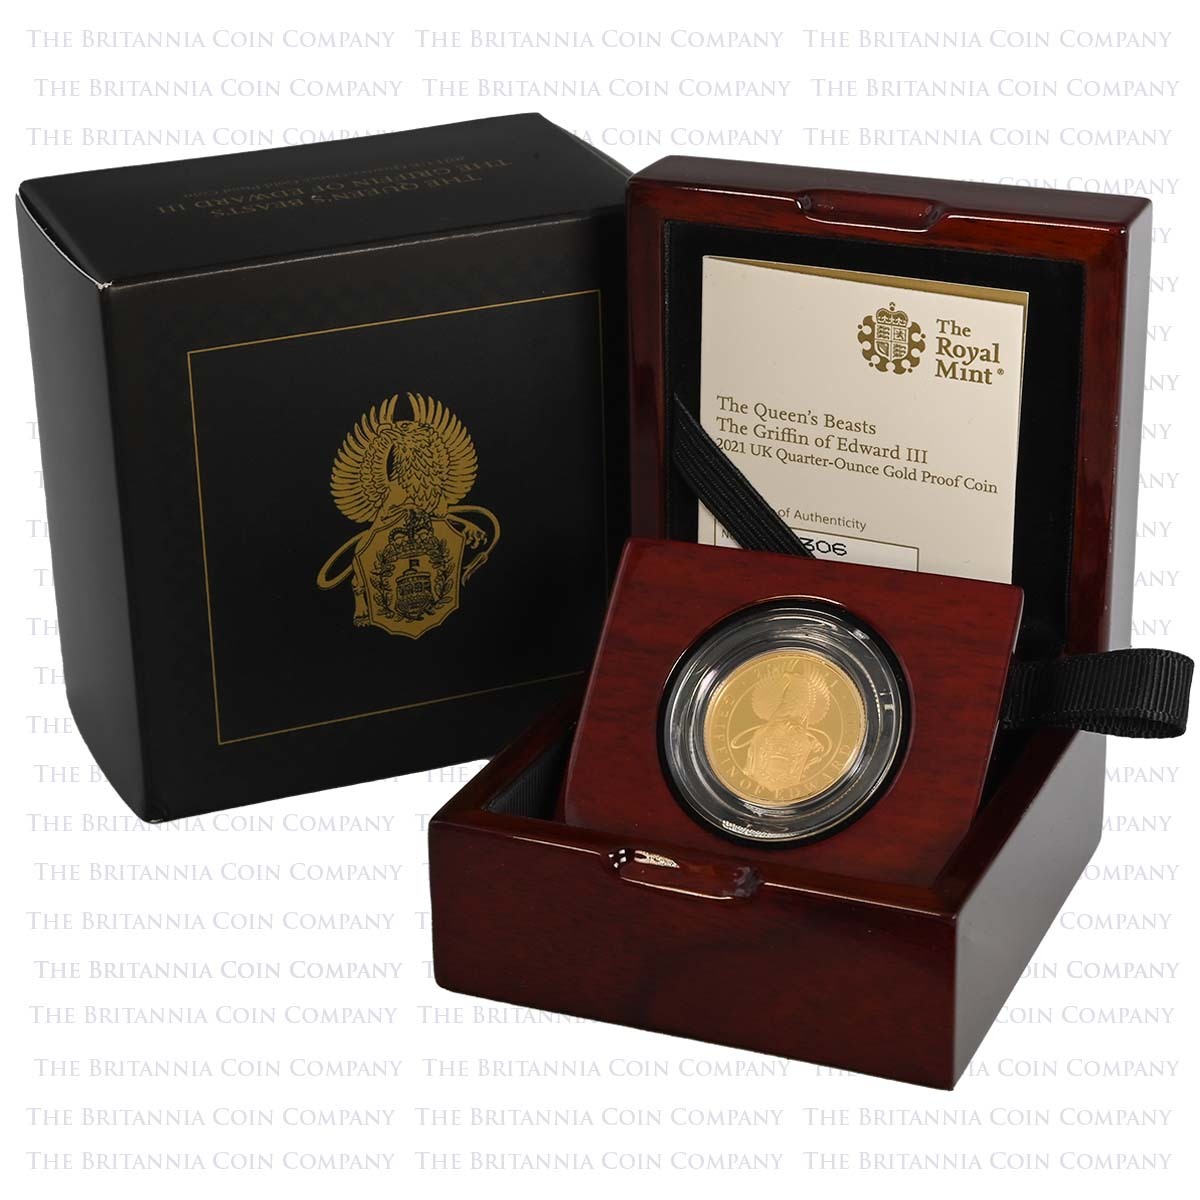 UK21QGQO 2021 Queen's Beasts Griffin Of Edward III Quarter Ounce Gold Proof Coin Boxed